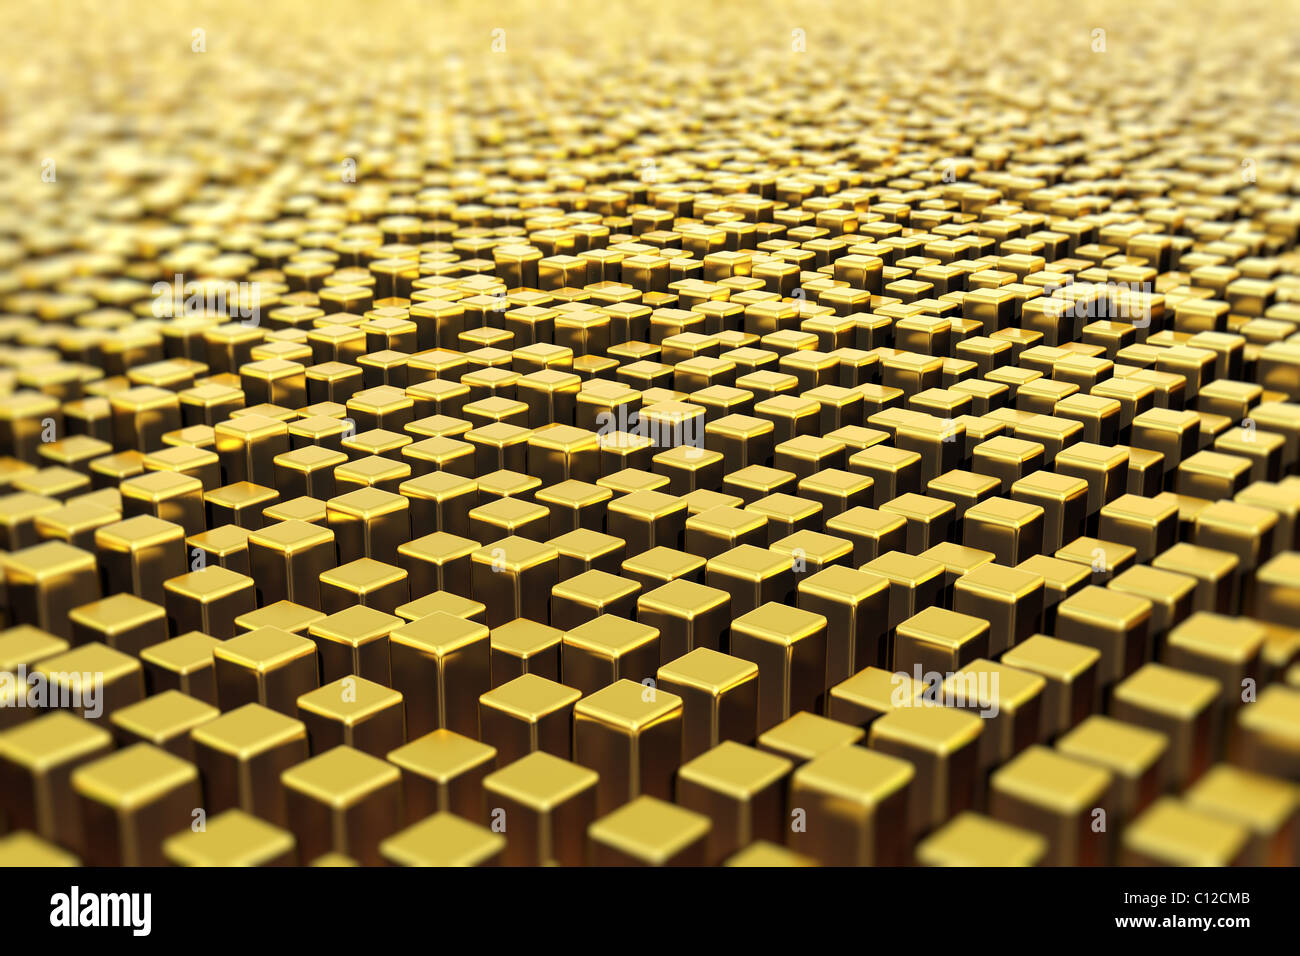 Surface of golden bars Stock Photo